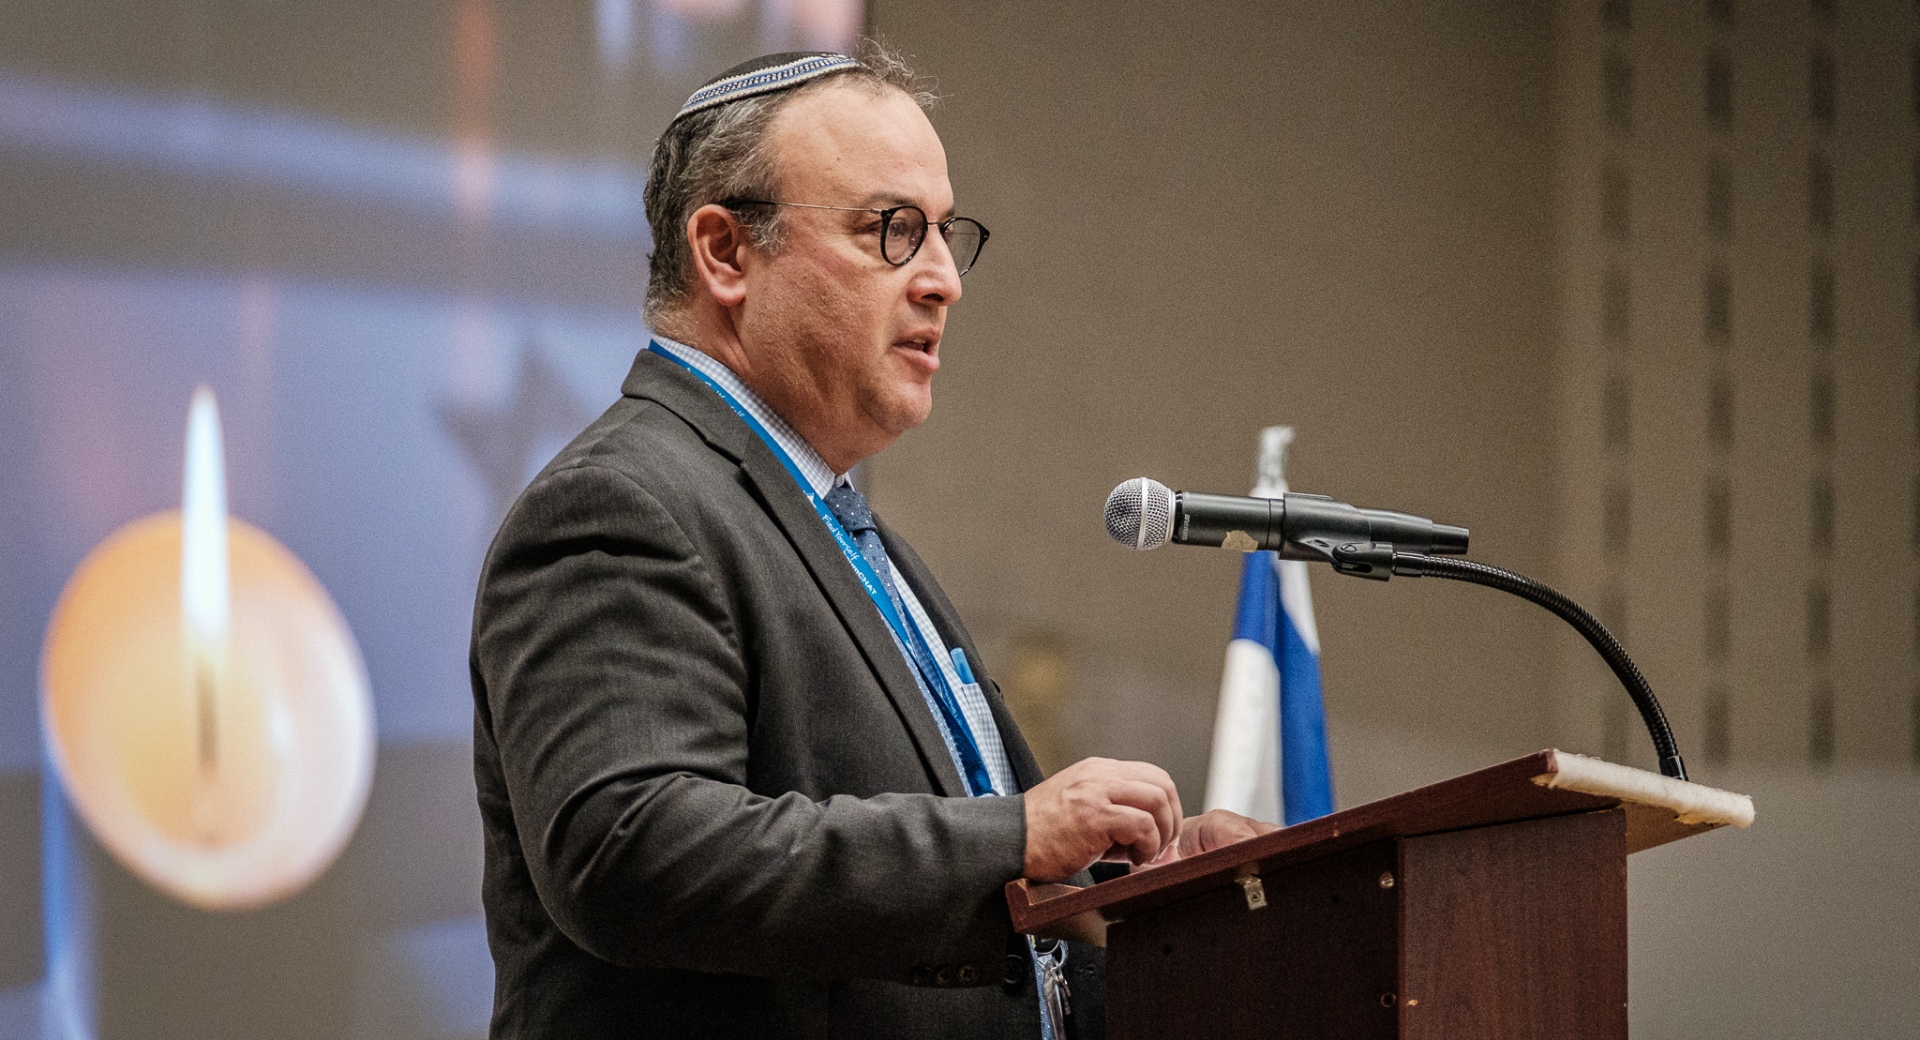 Bearing witness in Israel, by Head of School Dr. Jonathan Levy